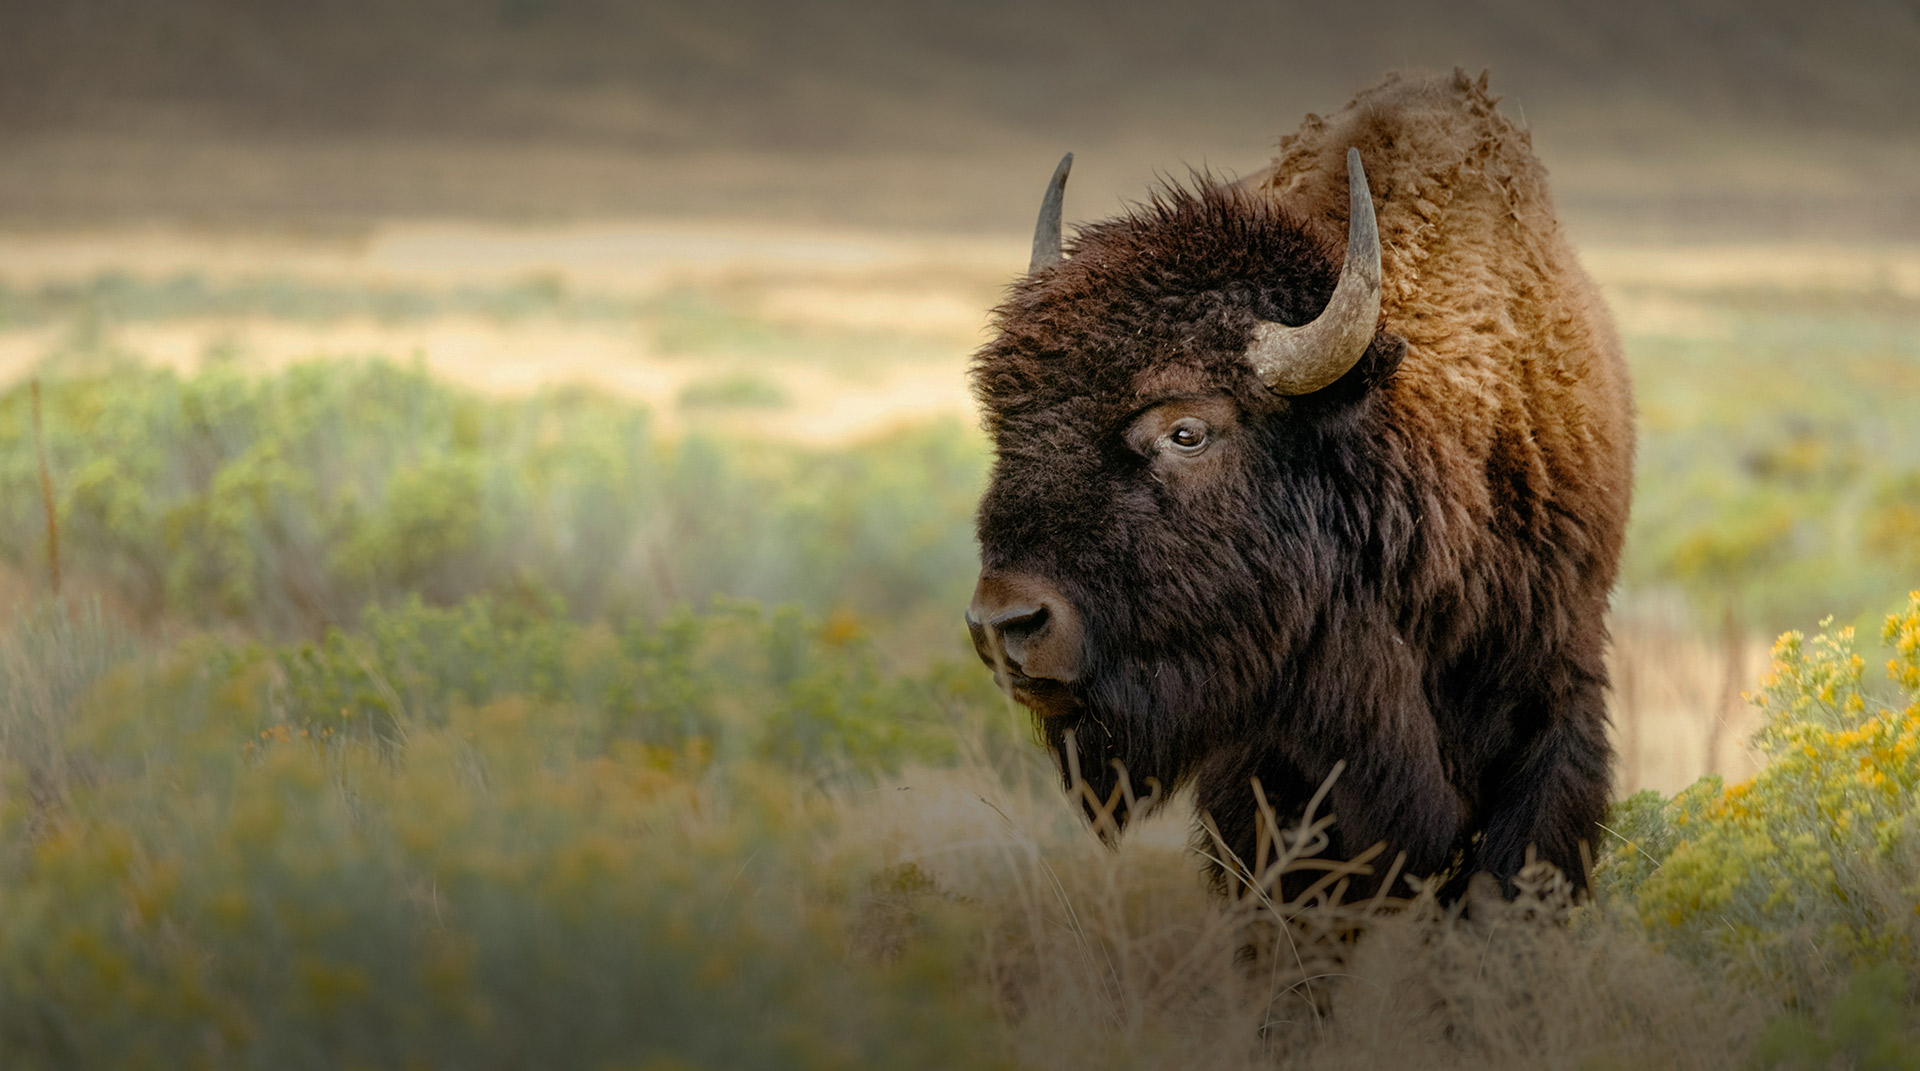 View of a bison on grass